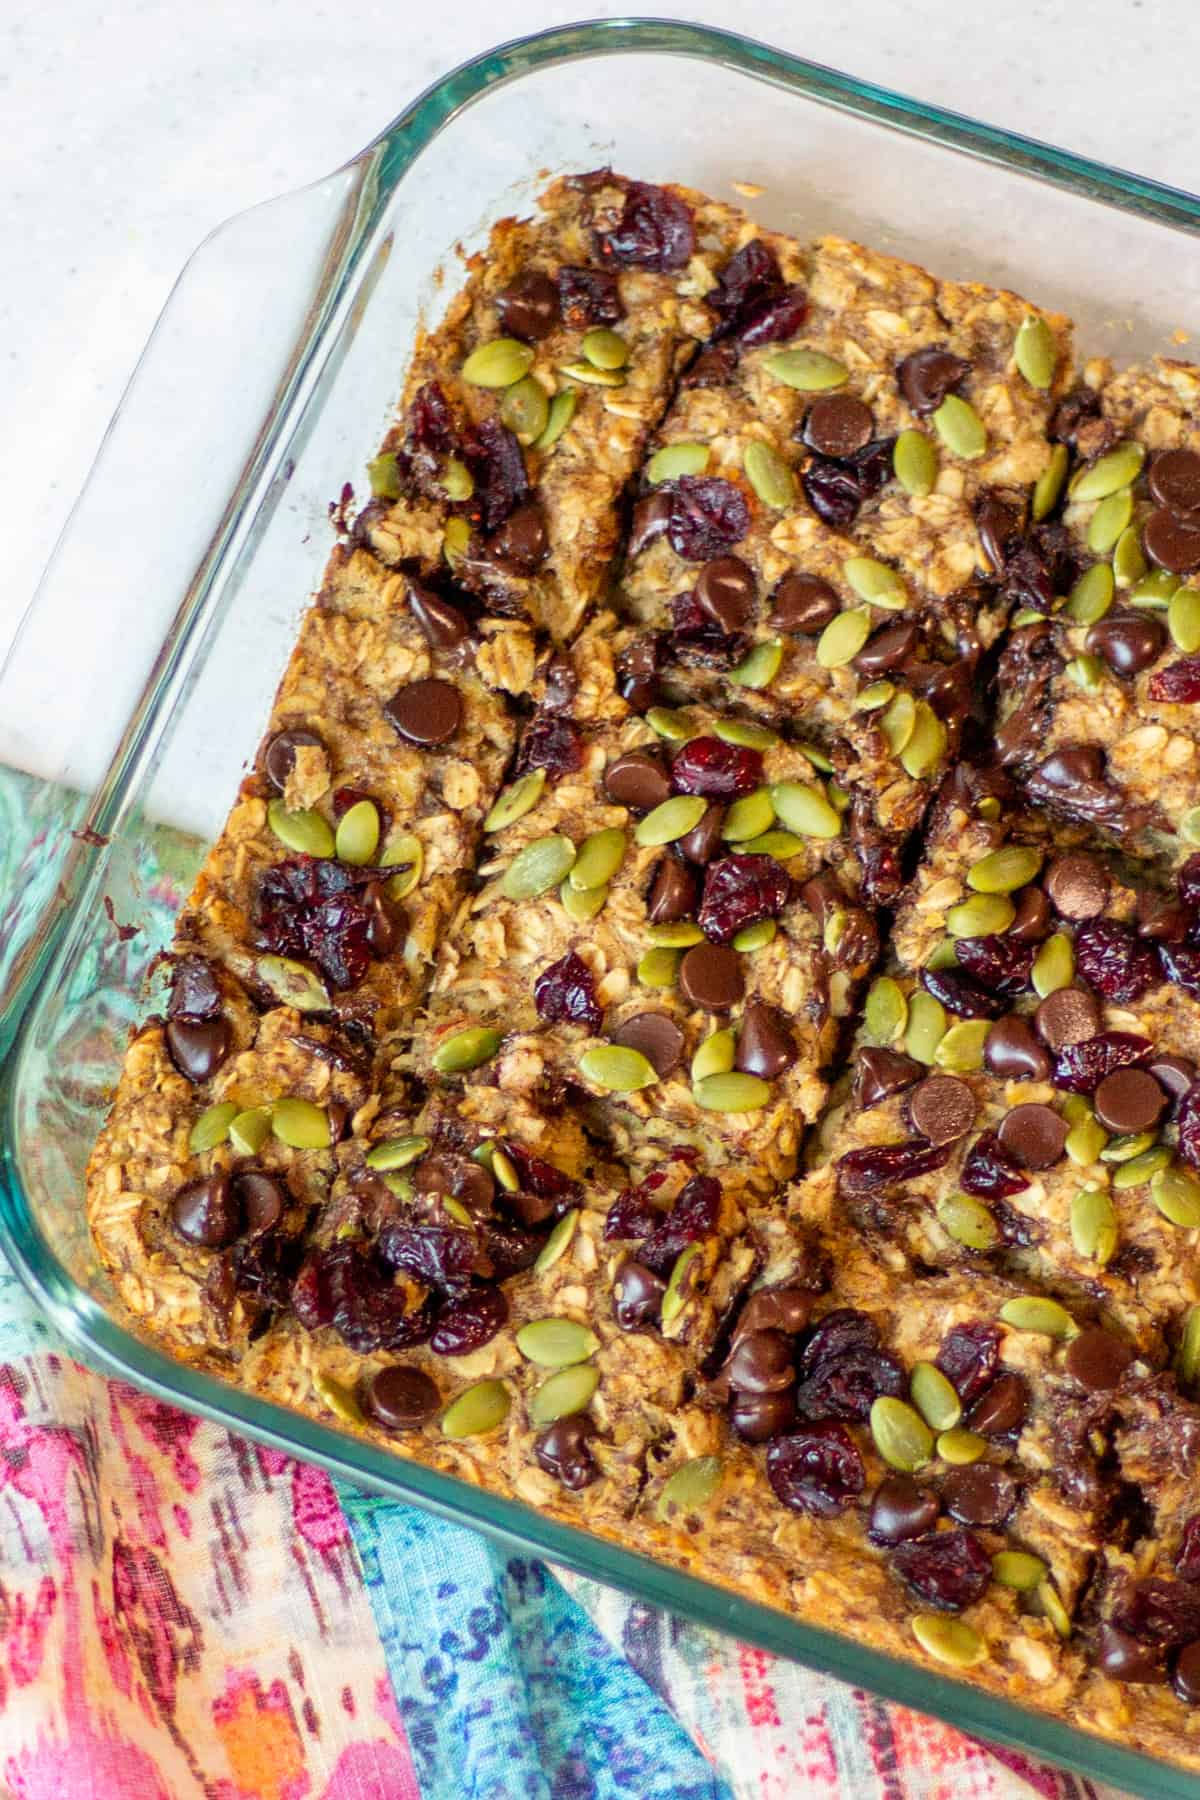 glass baking dish with baked banana oat bars topped with chocolate chips, dried cranberries and pepitas